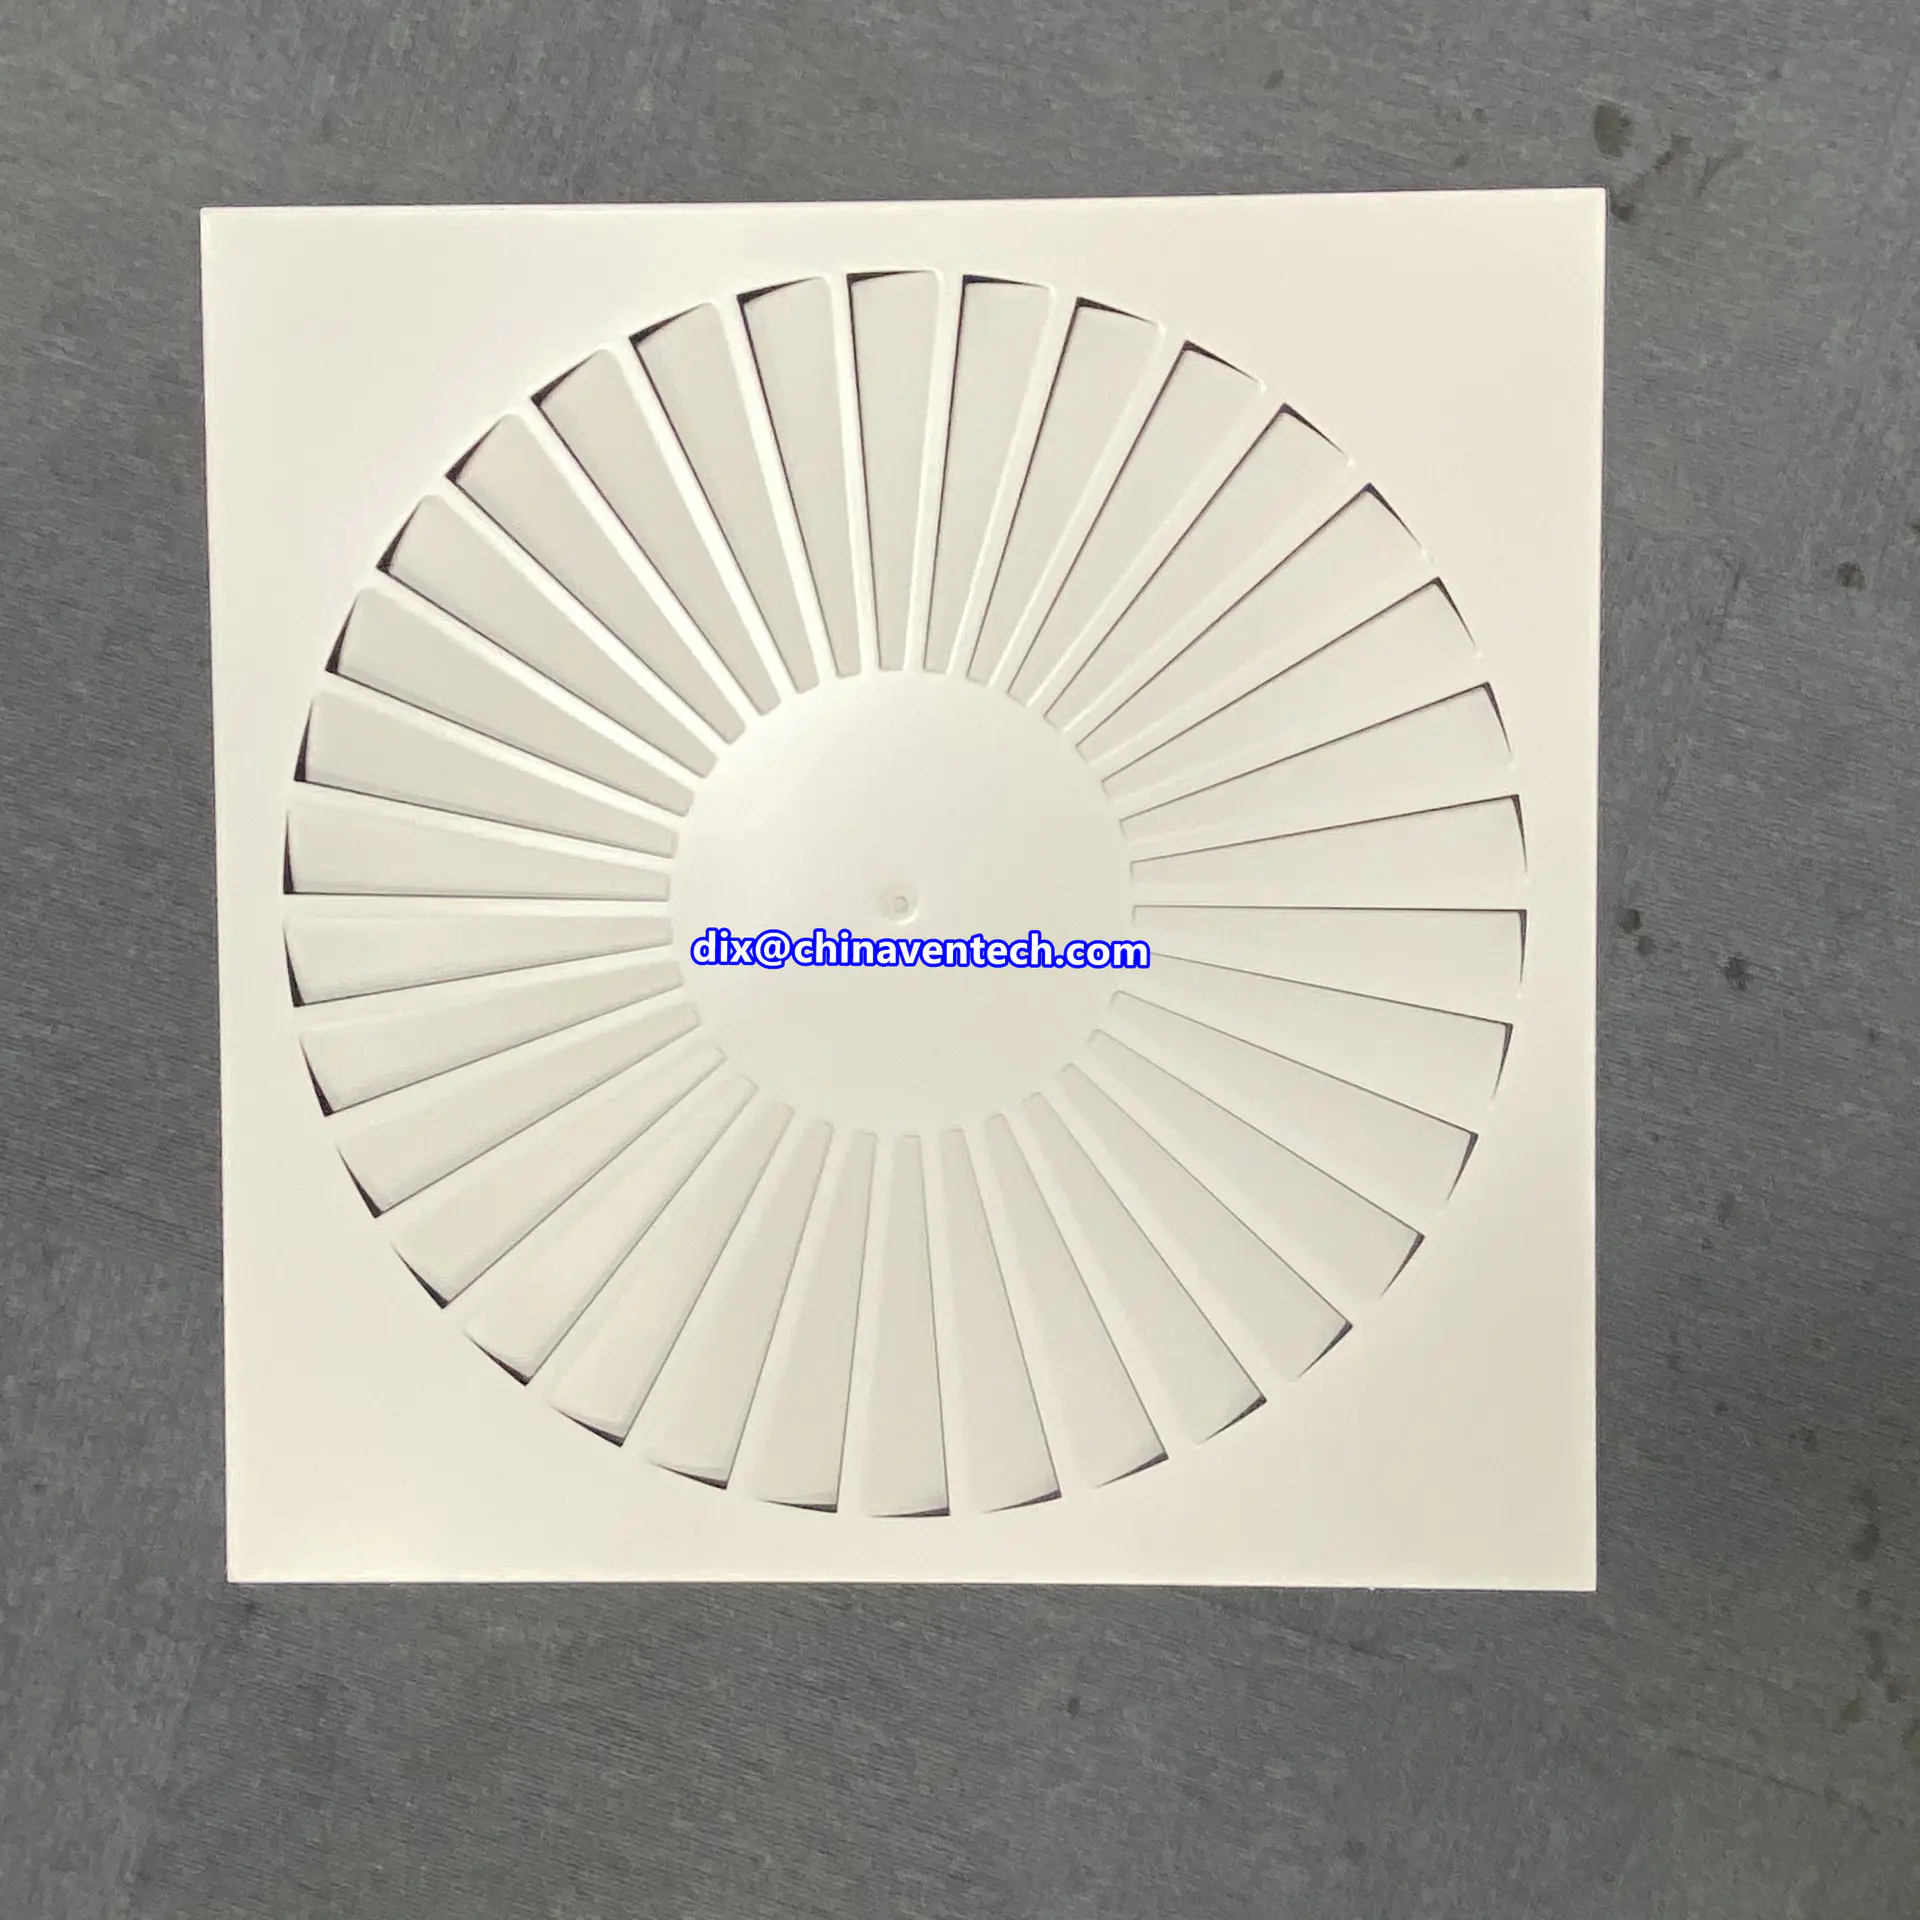 Air Conditioning Vent Covers for Office Ceiling Ventilation Square Swirl Diffuser SD-VA 600x600